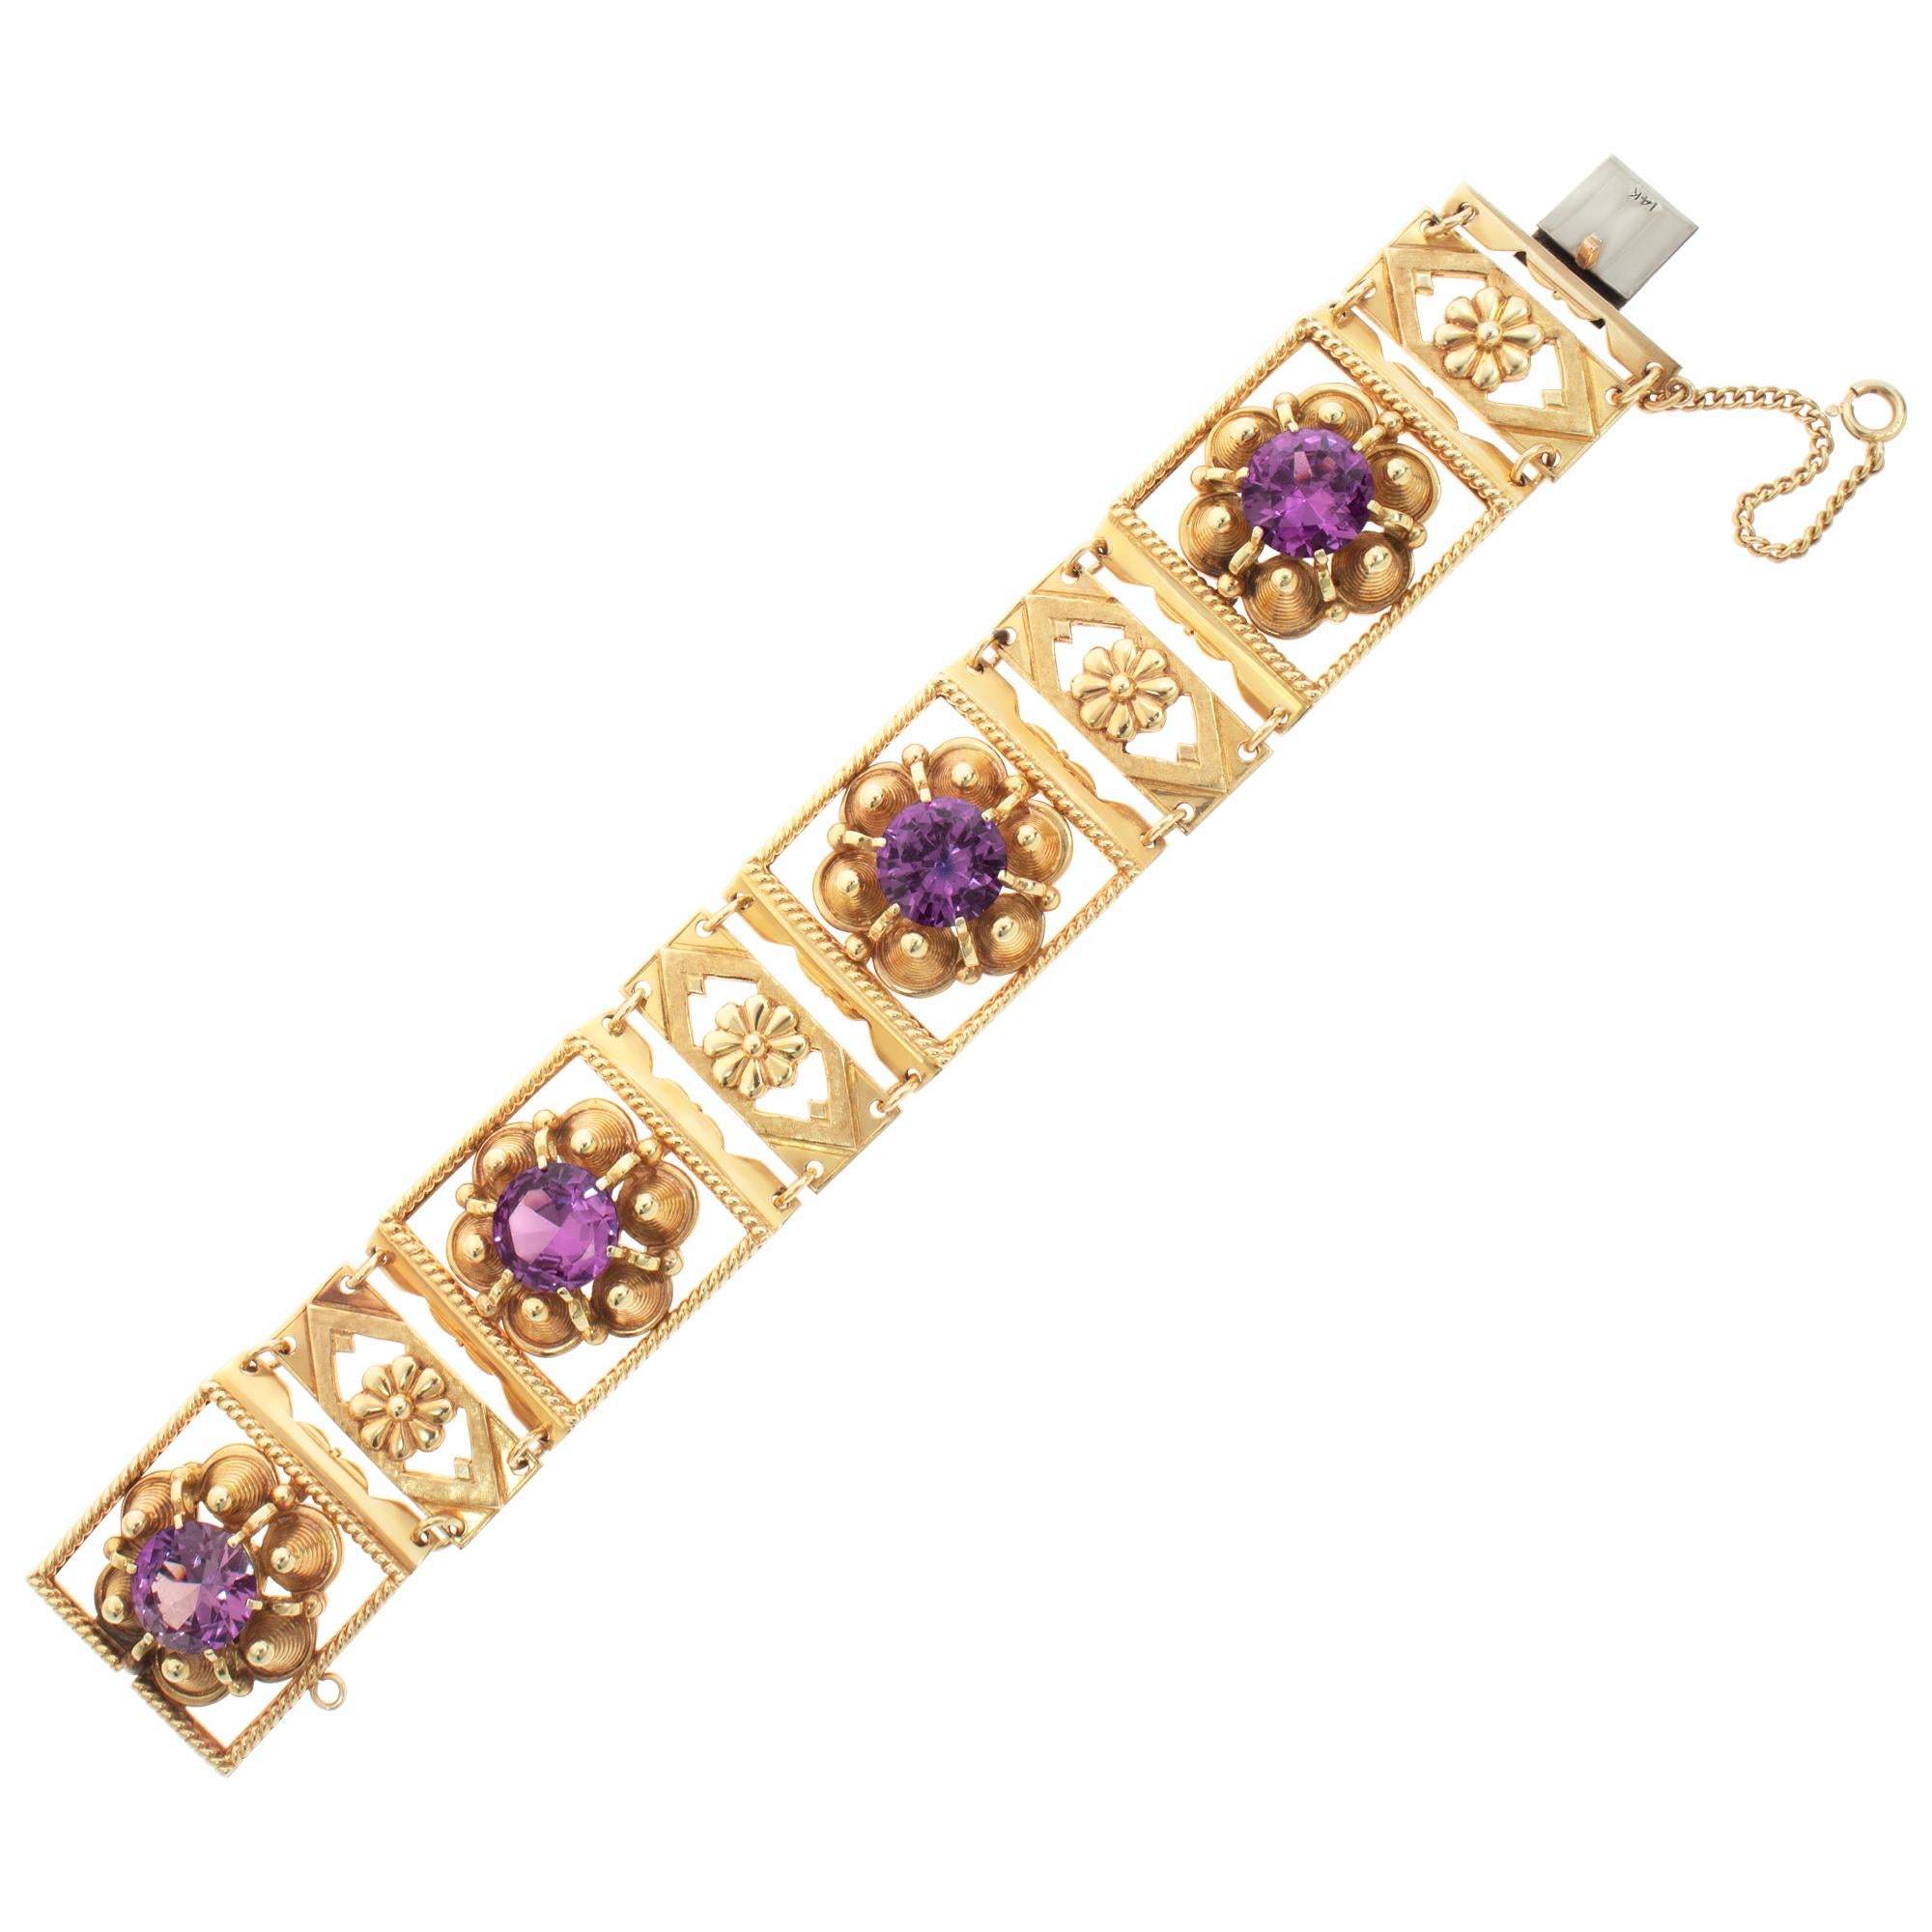 Women's Victorian Inspired Style 14k Yellow Gold Bracelet With four Pink Stones For Sale